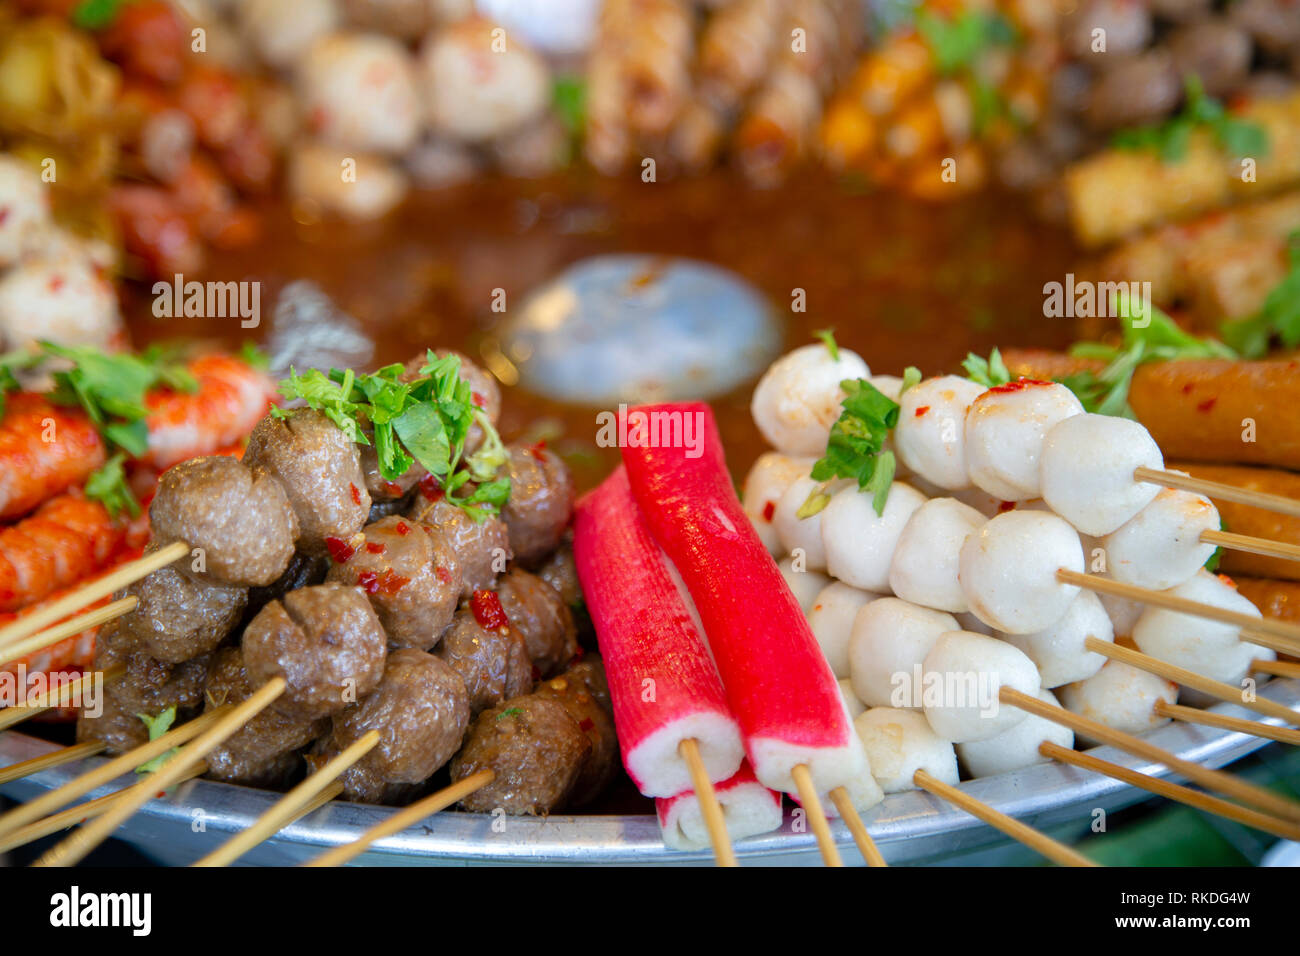 An arrangement of skewered cooked meat and seafood street food snacks and appetizers in a market stall in Phuket, Thailand. Stock Photo